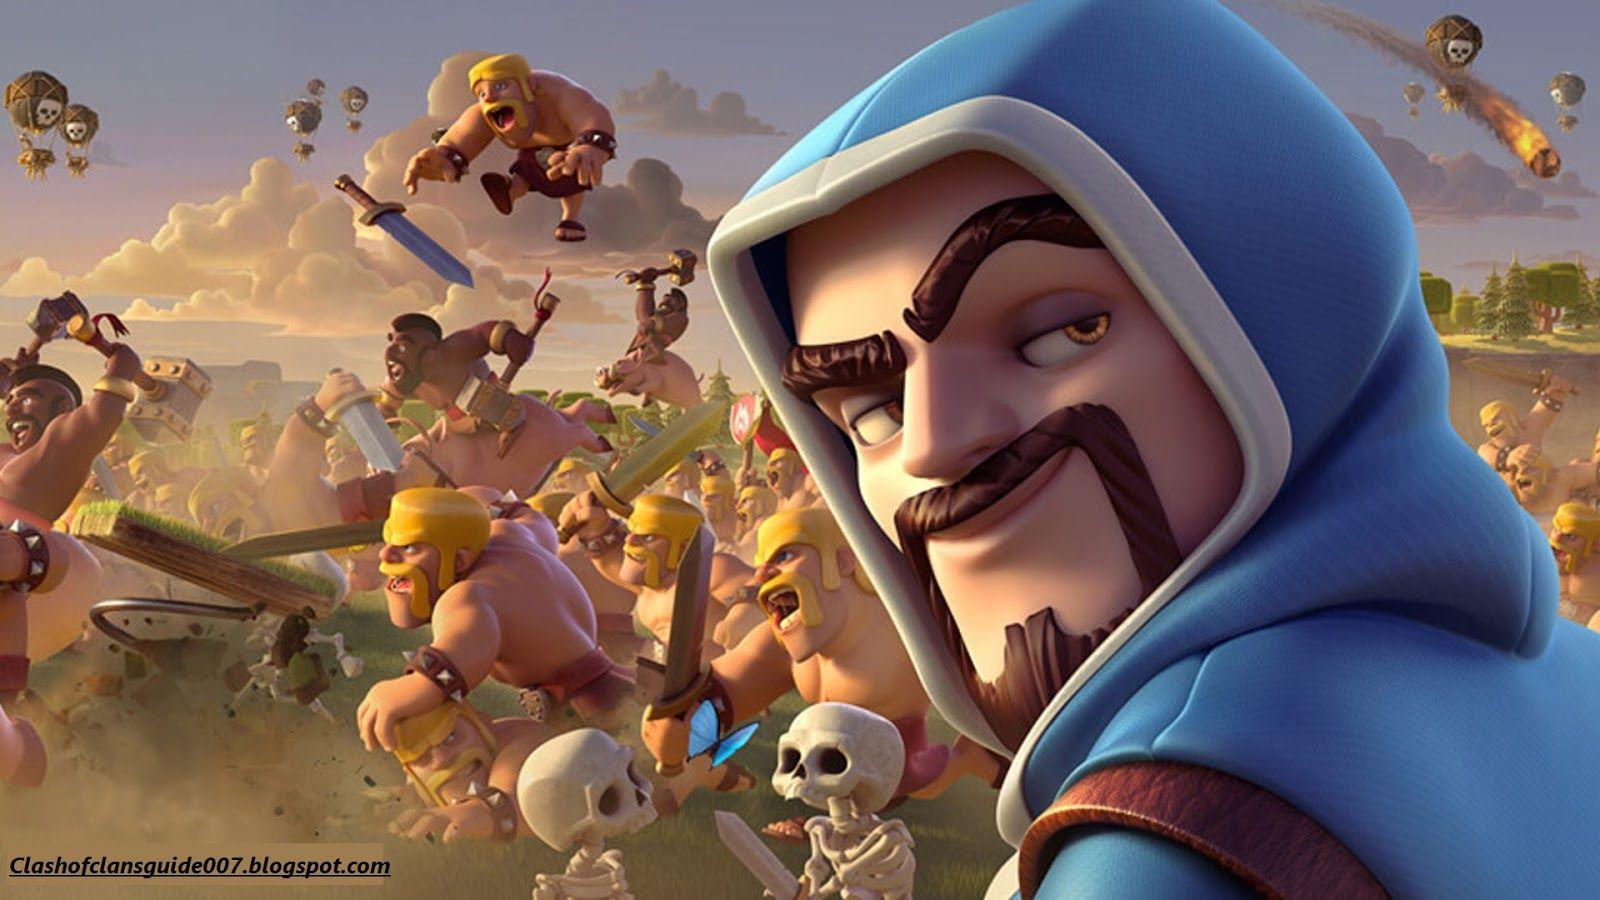 CLASH OF CLANS DECEMBER UPDATE. OF CLANS